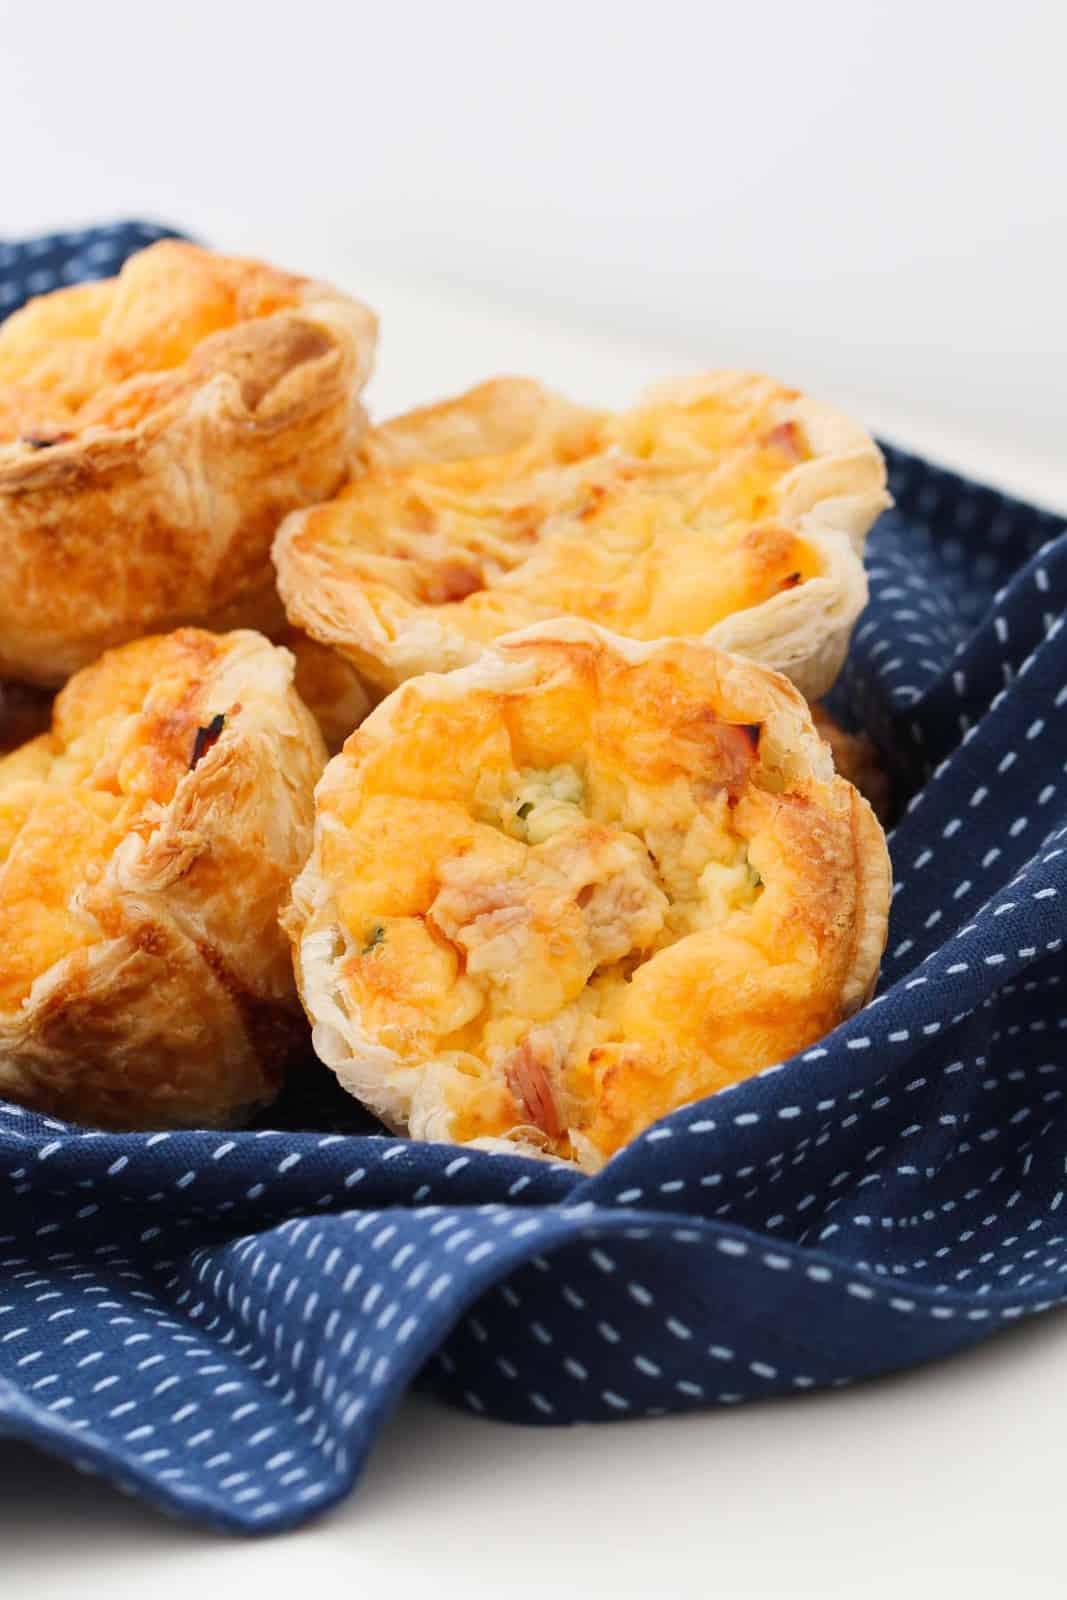 Four mini corn, ham and cheese quiches with a puff pastry crust arranged on a blue patterned tea towel.